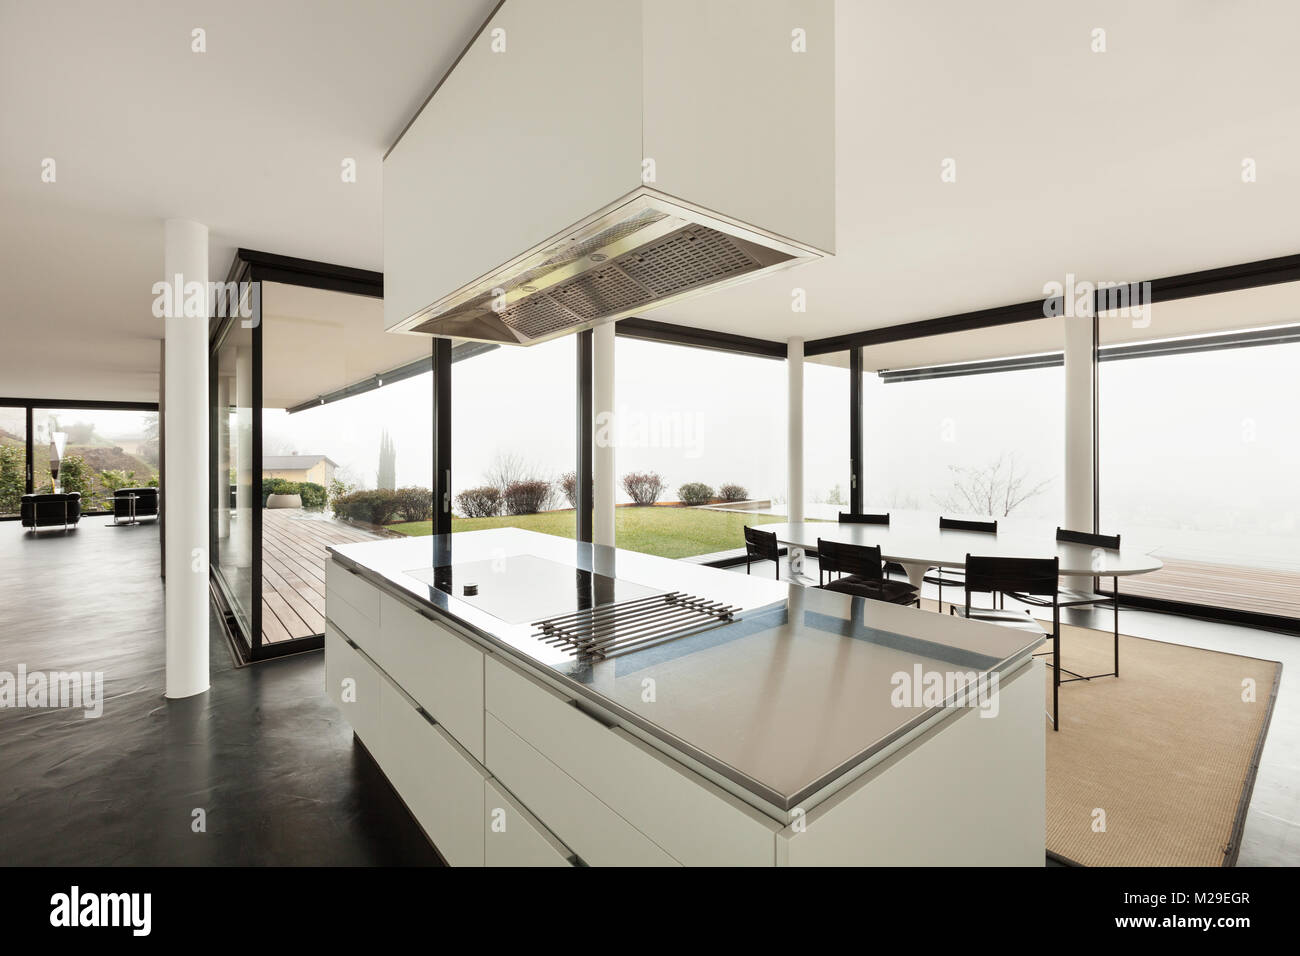 Architecture, beautiful interior of a modern villa, view from the kitchen Stock Photo